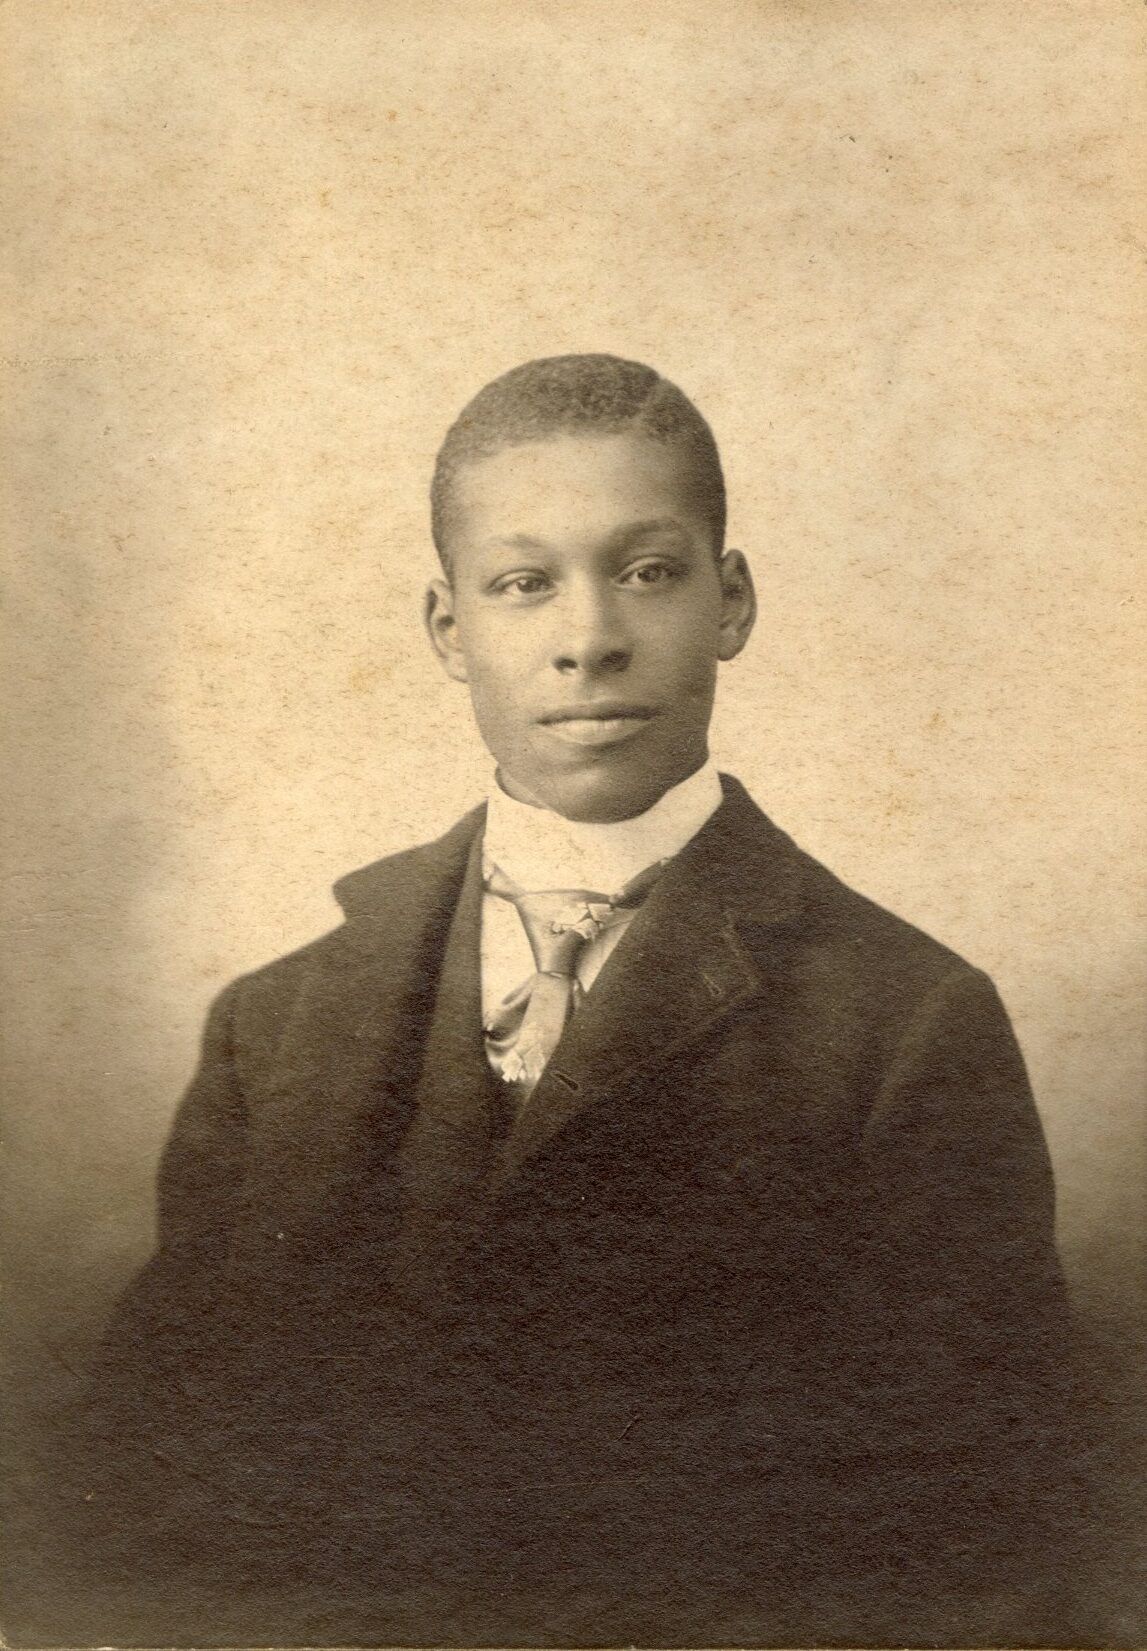 Studio portrait of a young black man wearing a suit and fancy tie.